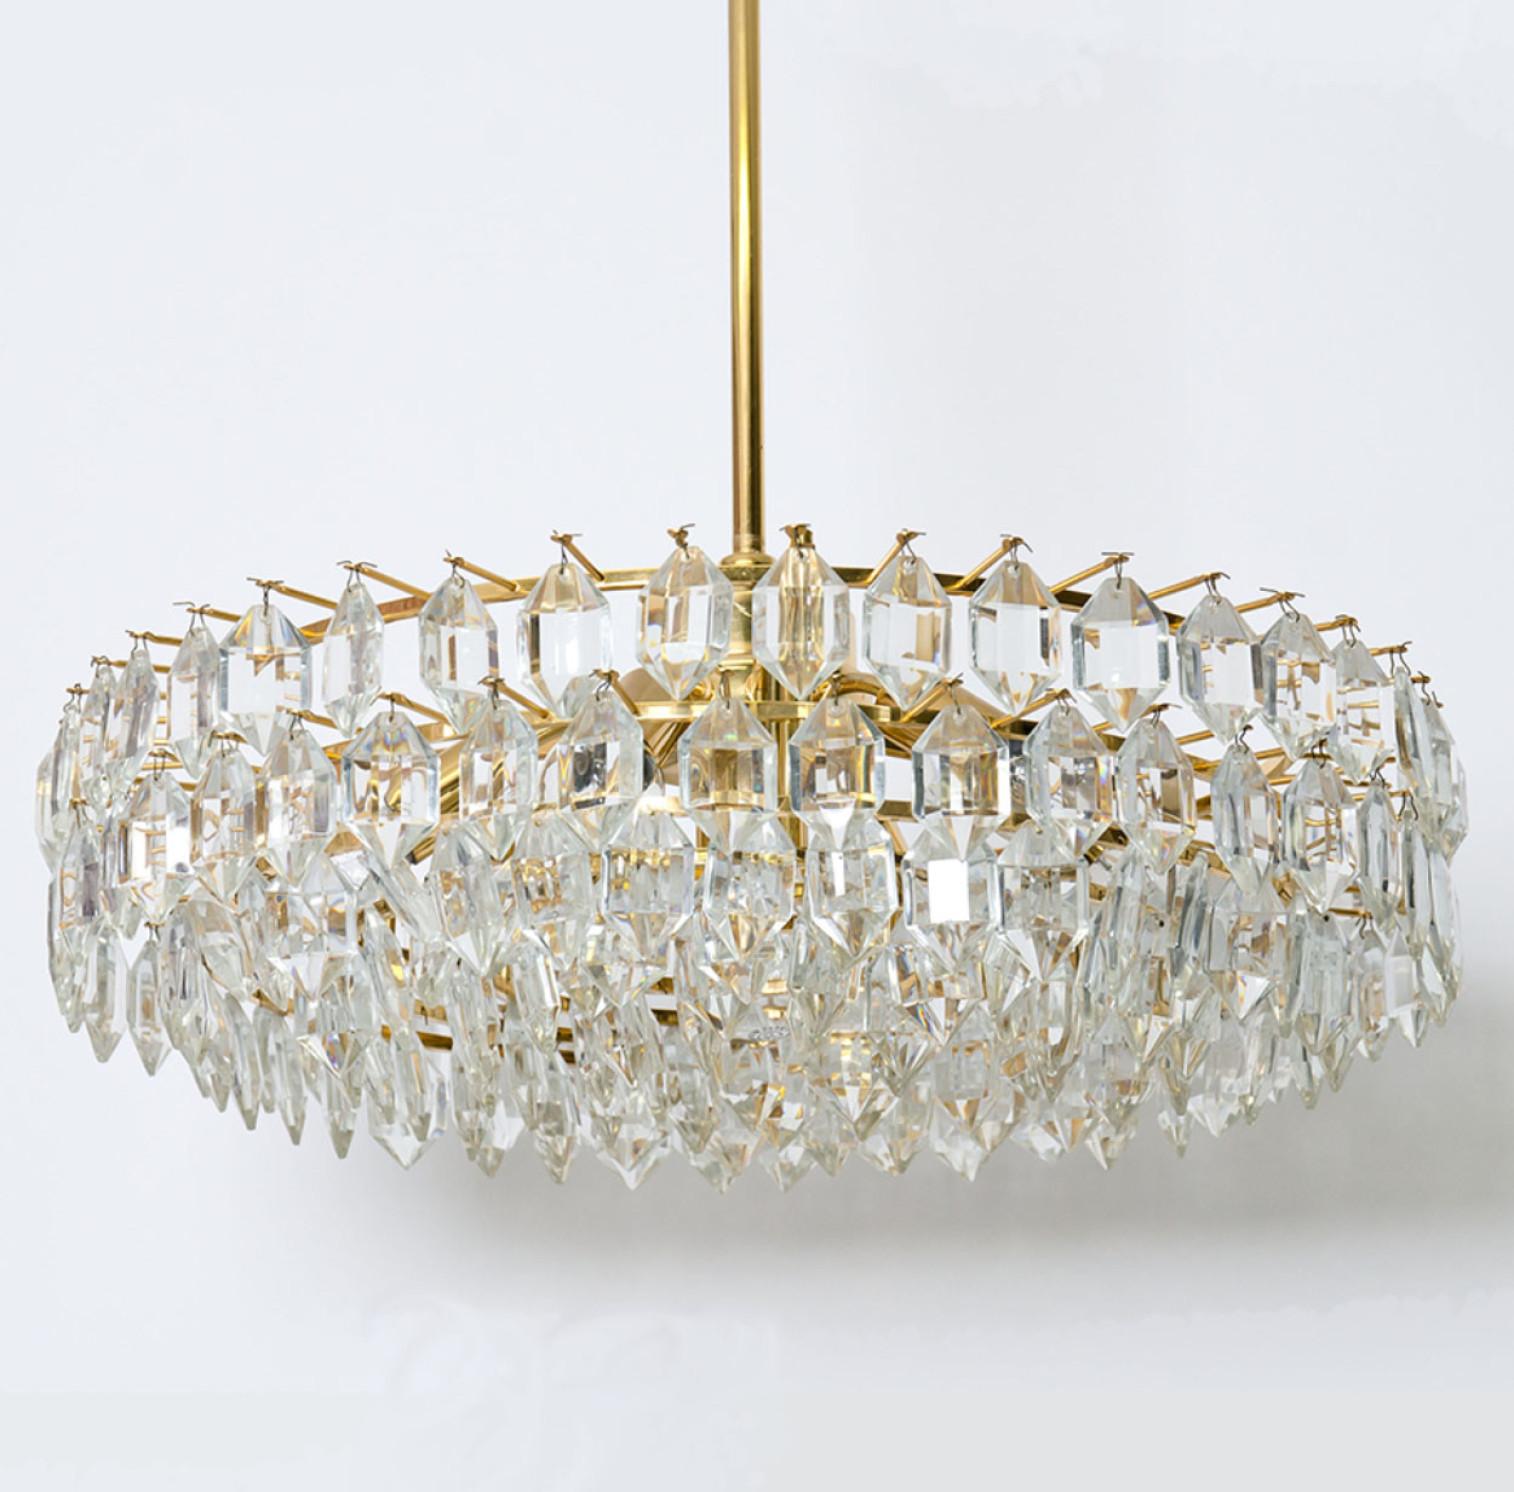 Other Pair of Bakalowits & Sohne Chandeliers, Brass and Crystal Glass, Austria, 1960s For Sale